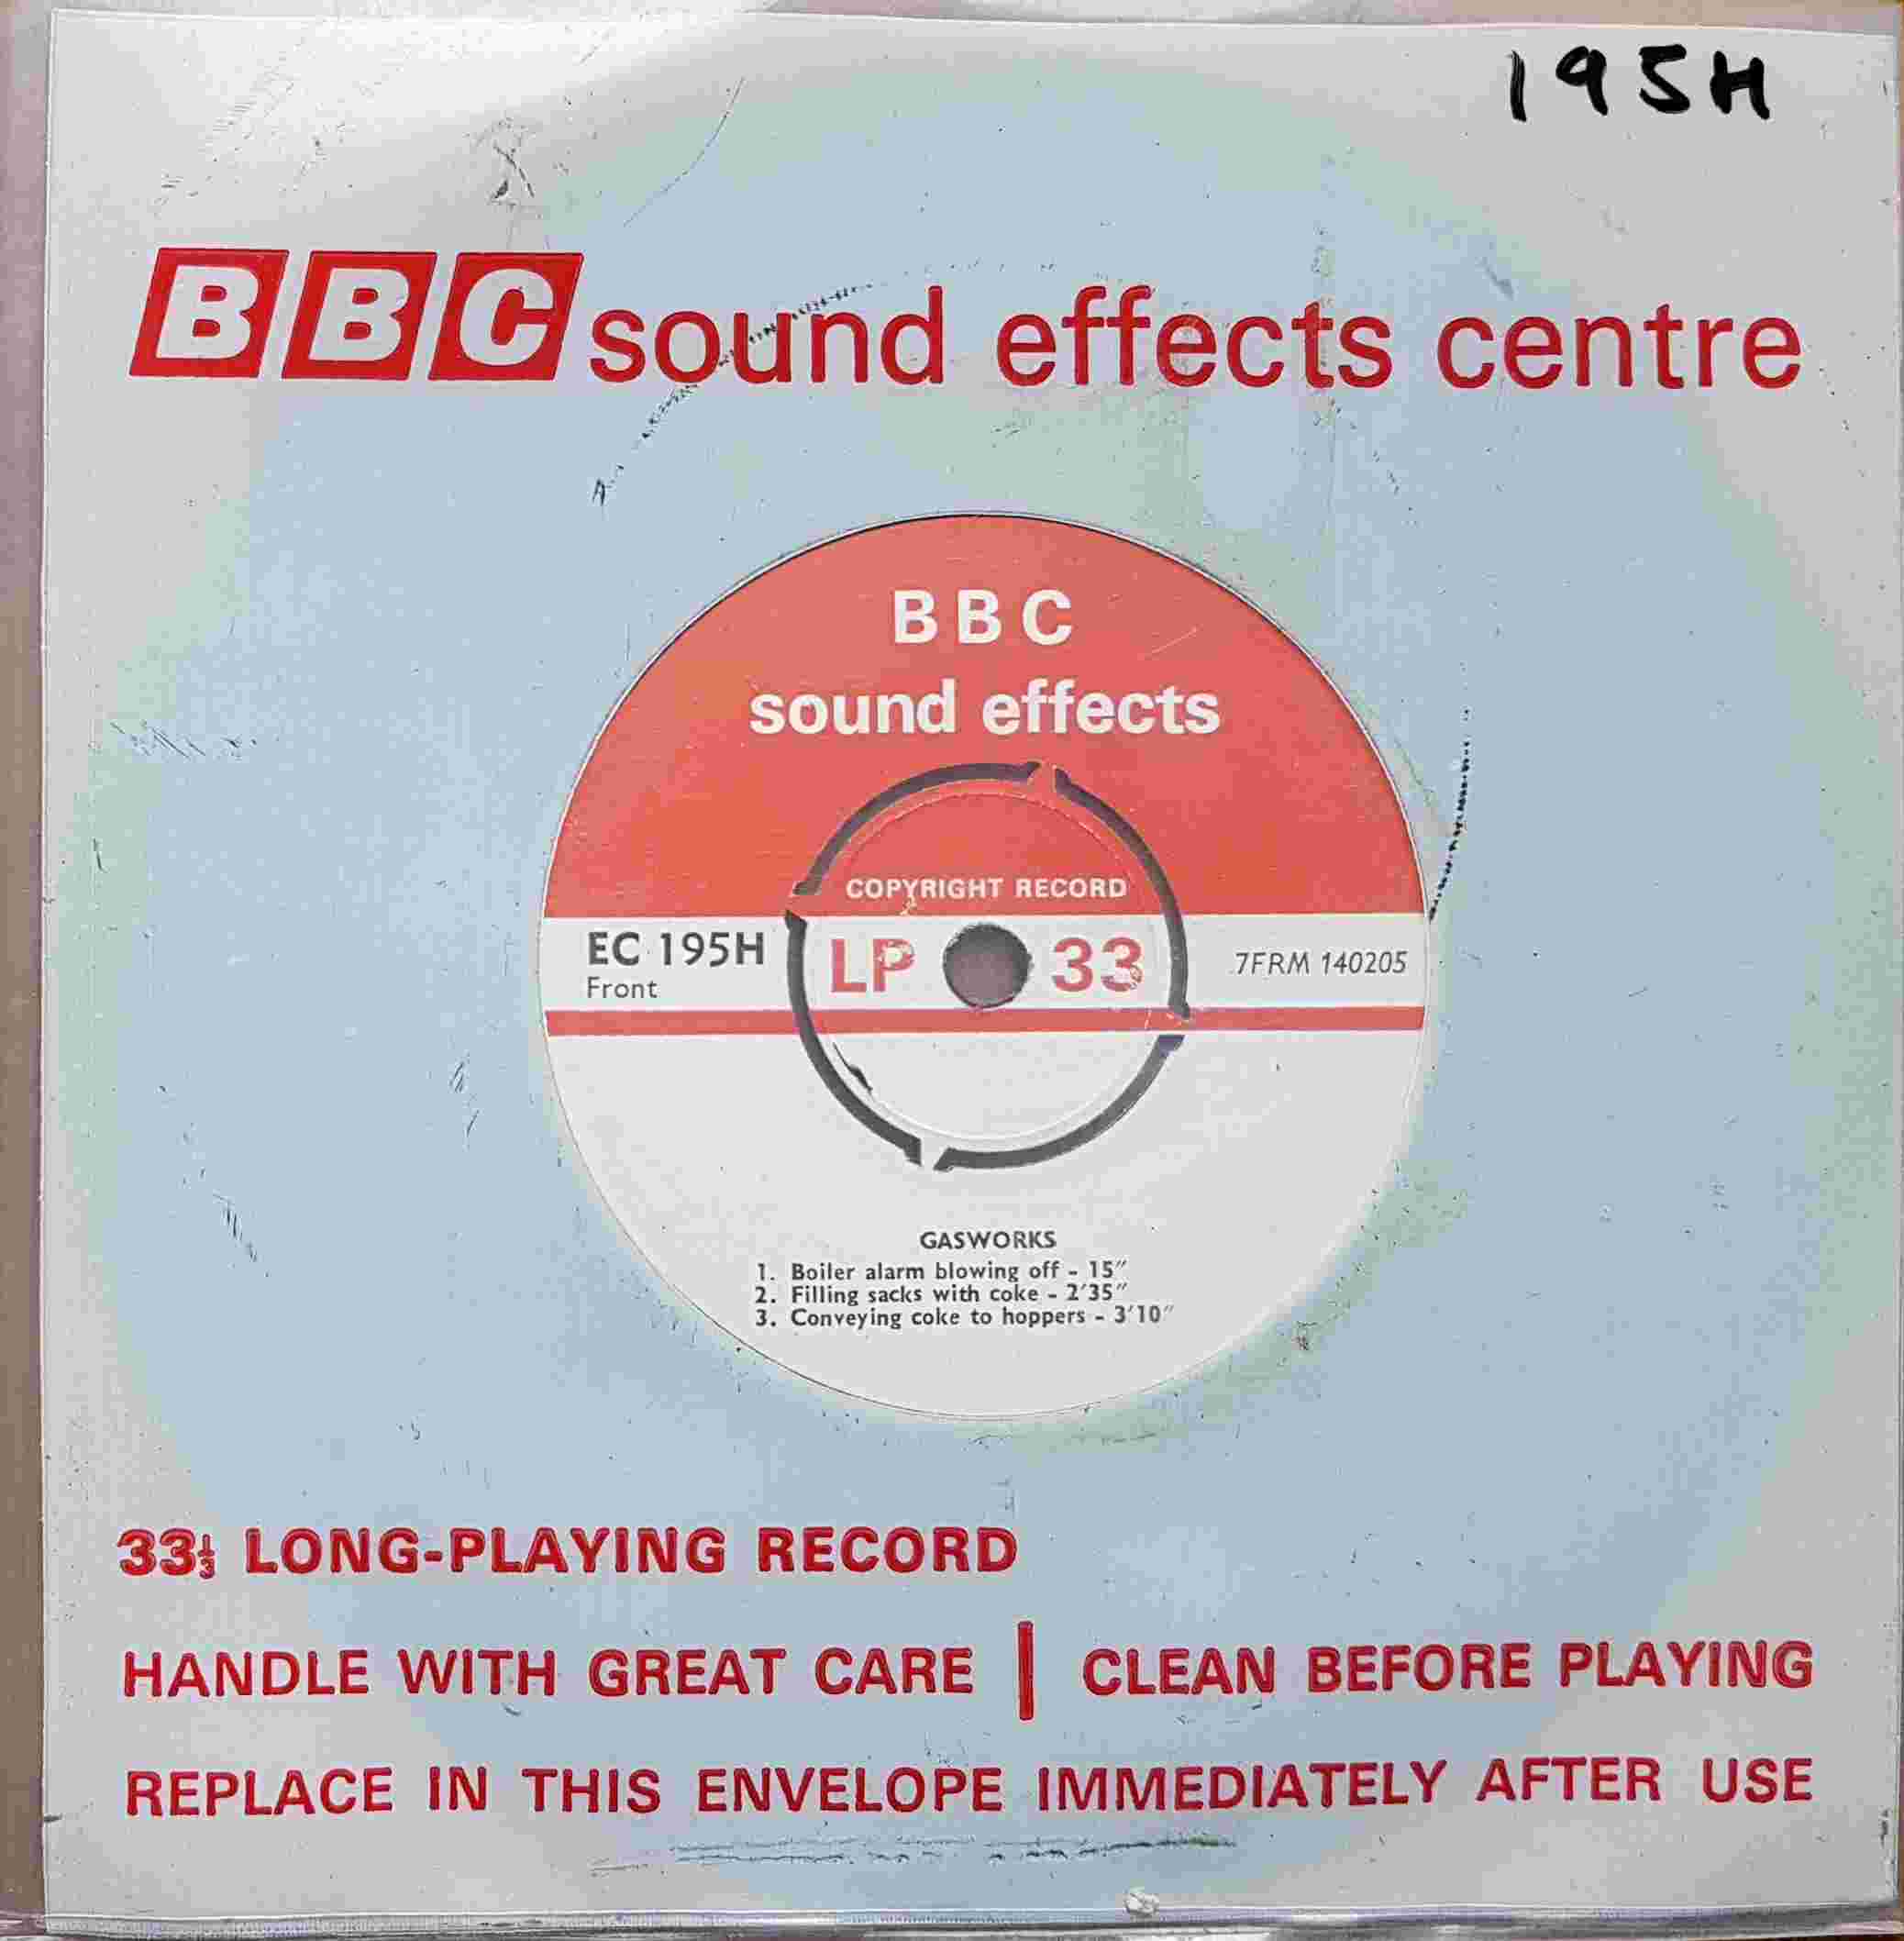 Picture of EC 195H Gasworks by artist Not registered from the BBC singles - Records and Tapes library